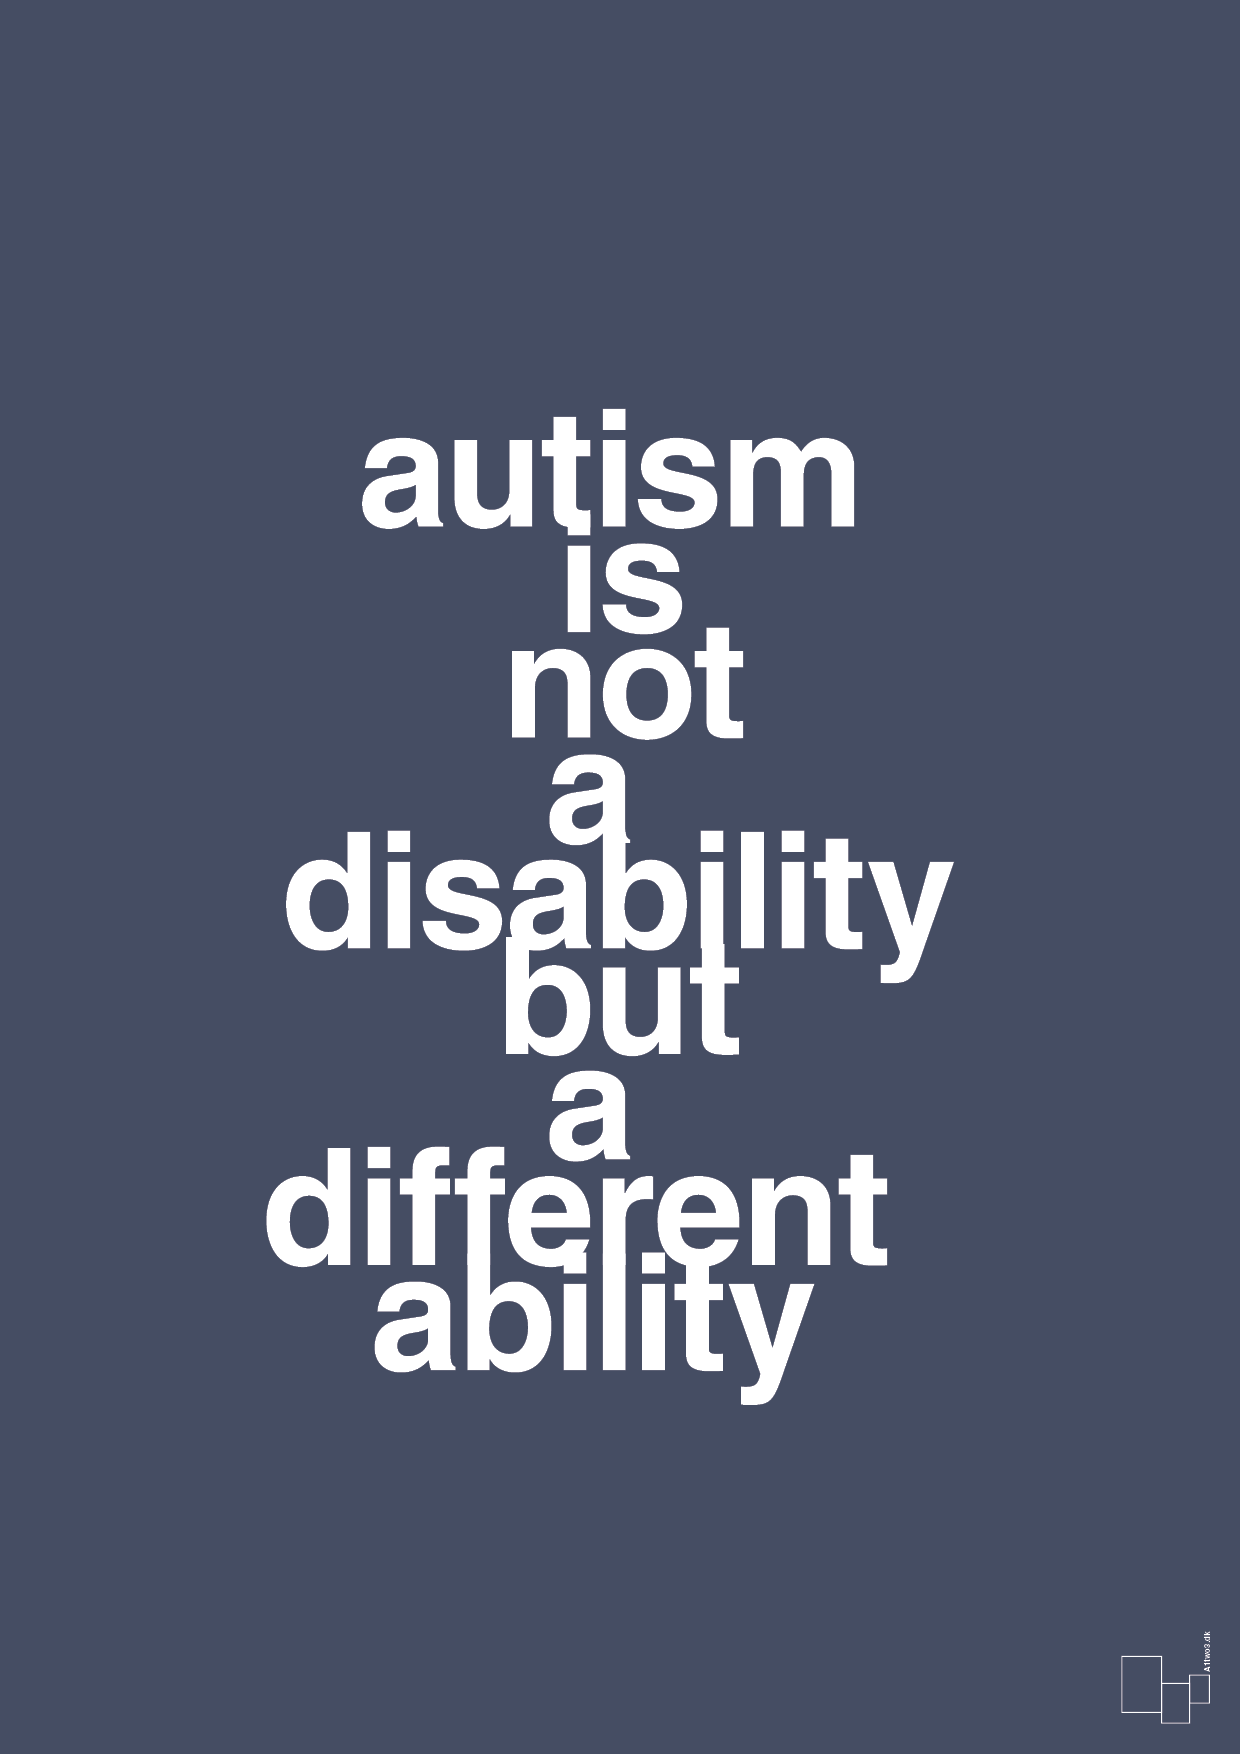 autism is not a disability but a different ability - Plakat med Samfund i Petrol